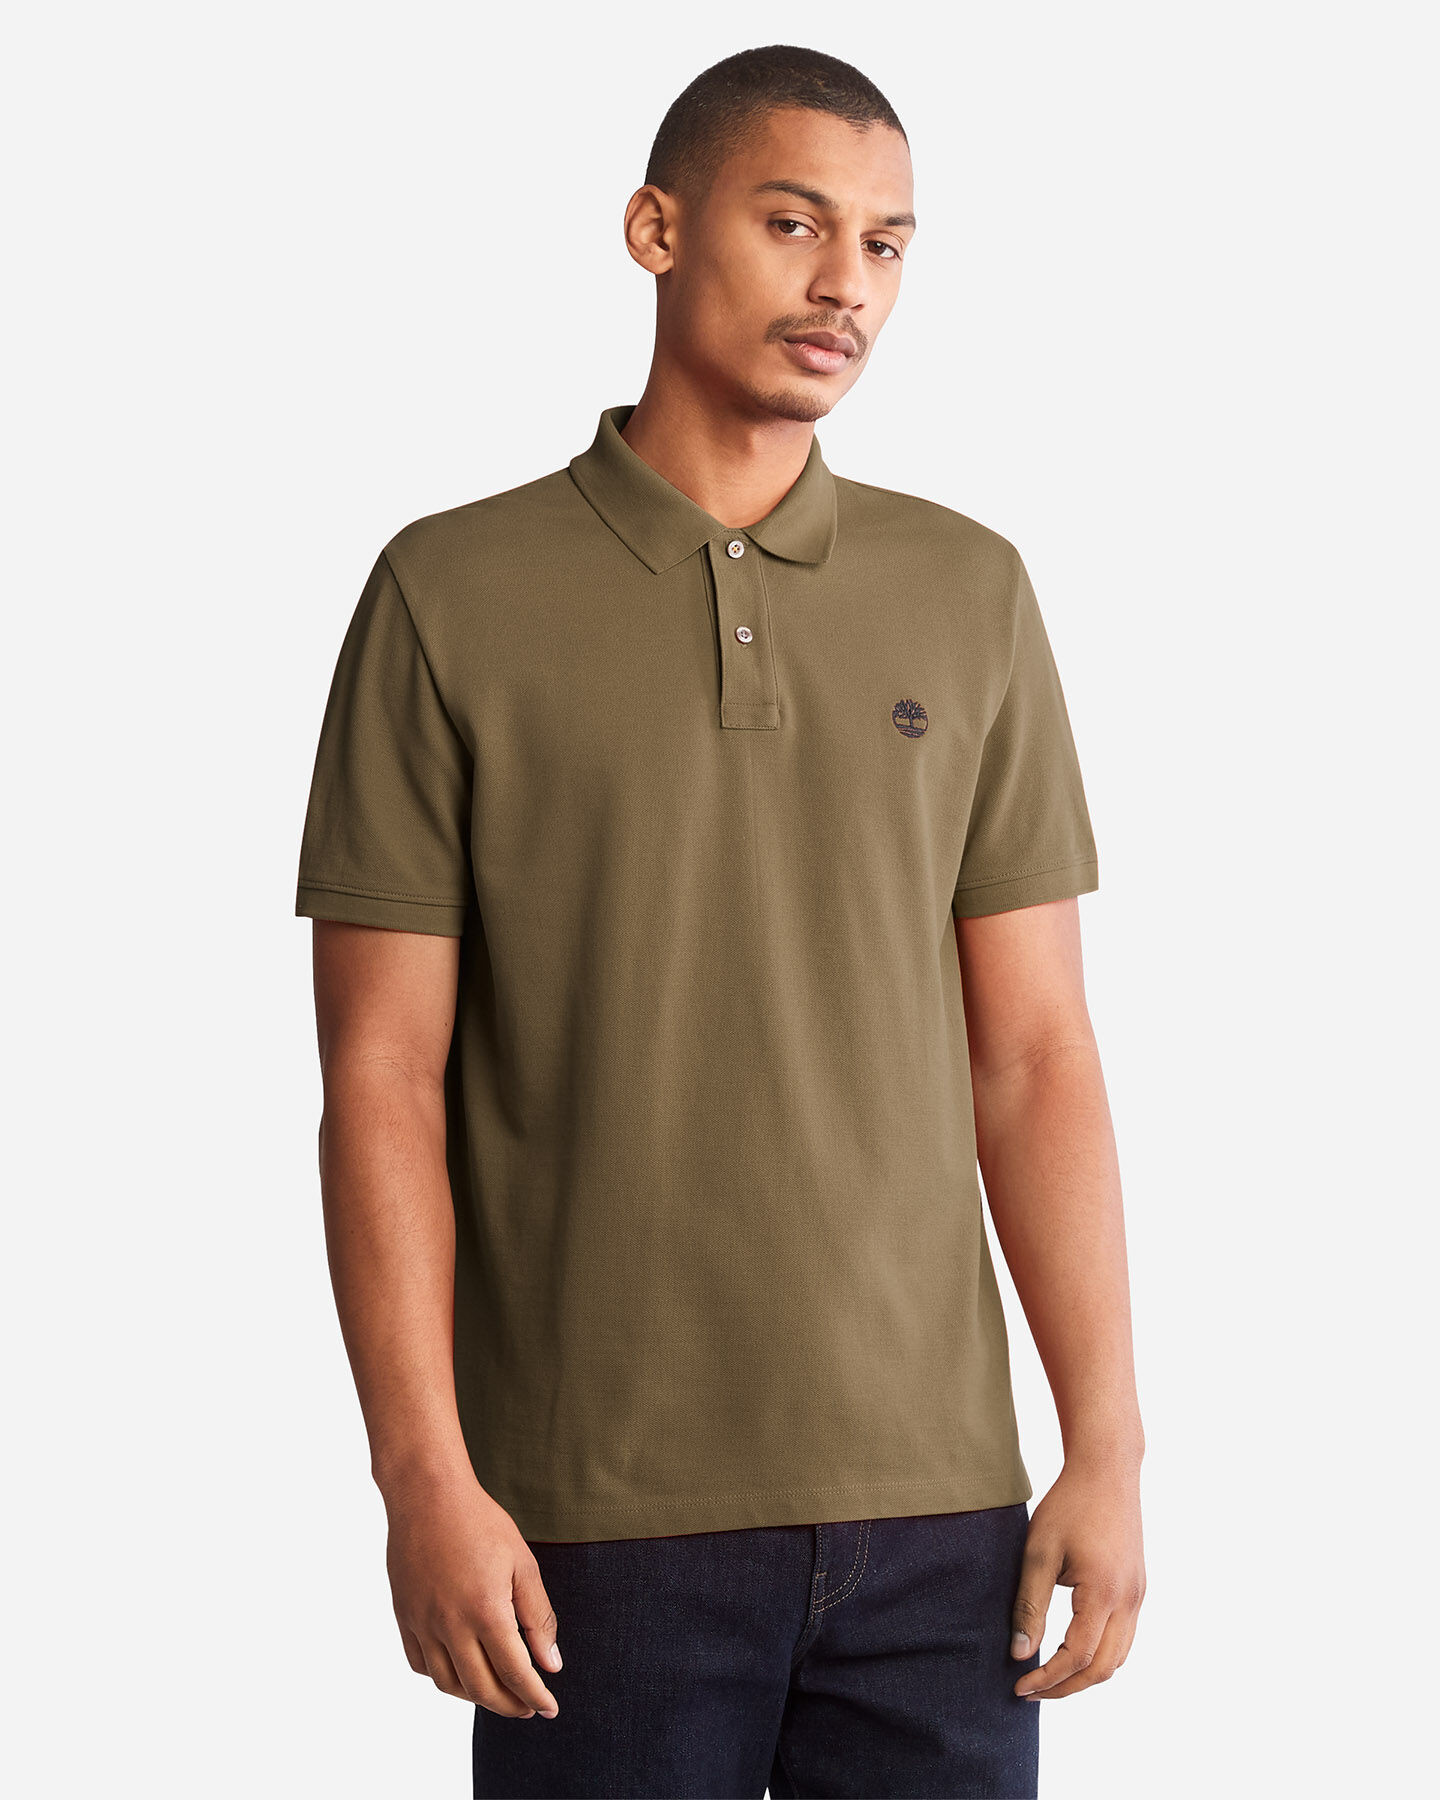  Polo TIMBERLAND MILLERS RIVER M S4104746|A581|S scatto 0